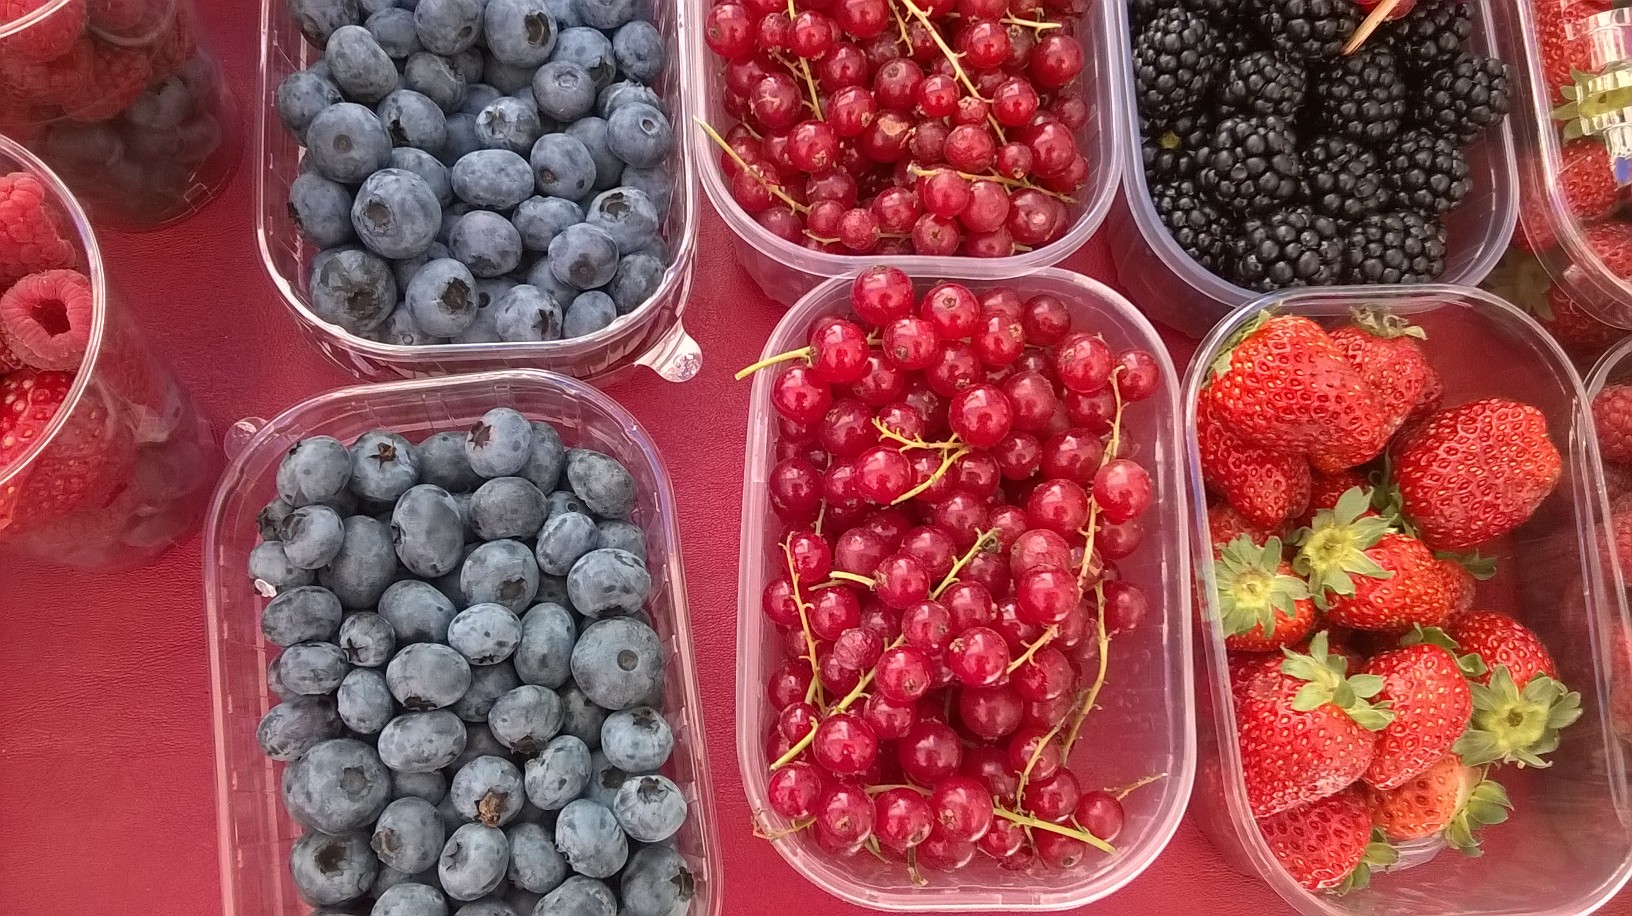 Berries contain antioxidants and fibre which aids healthy digestion.